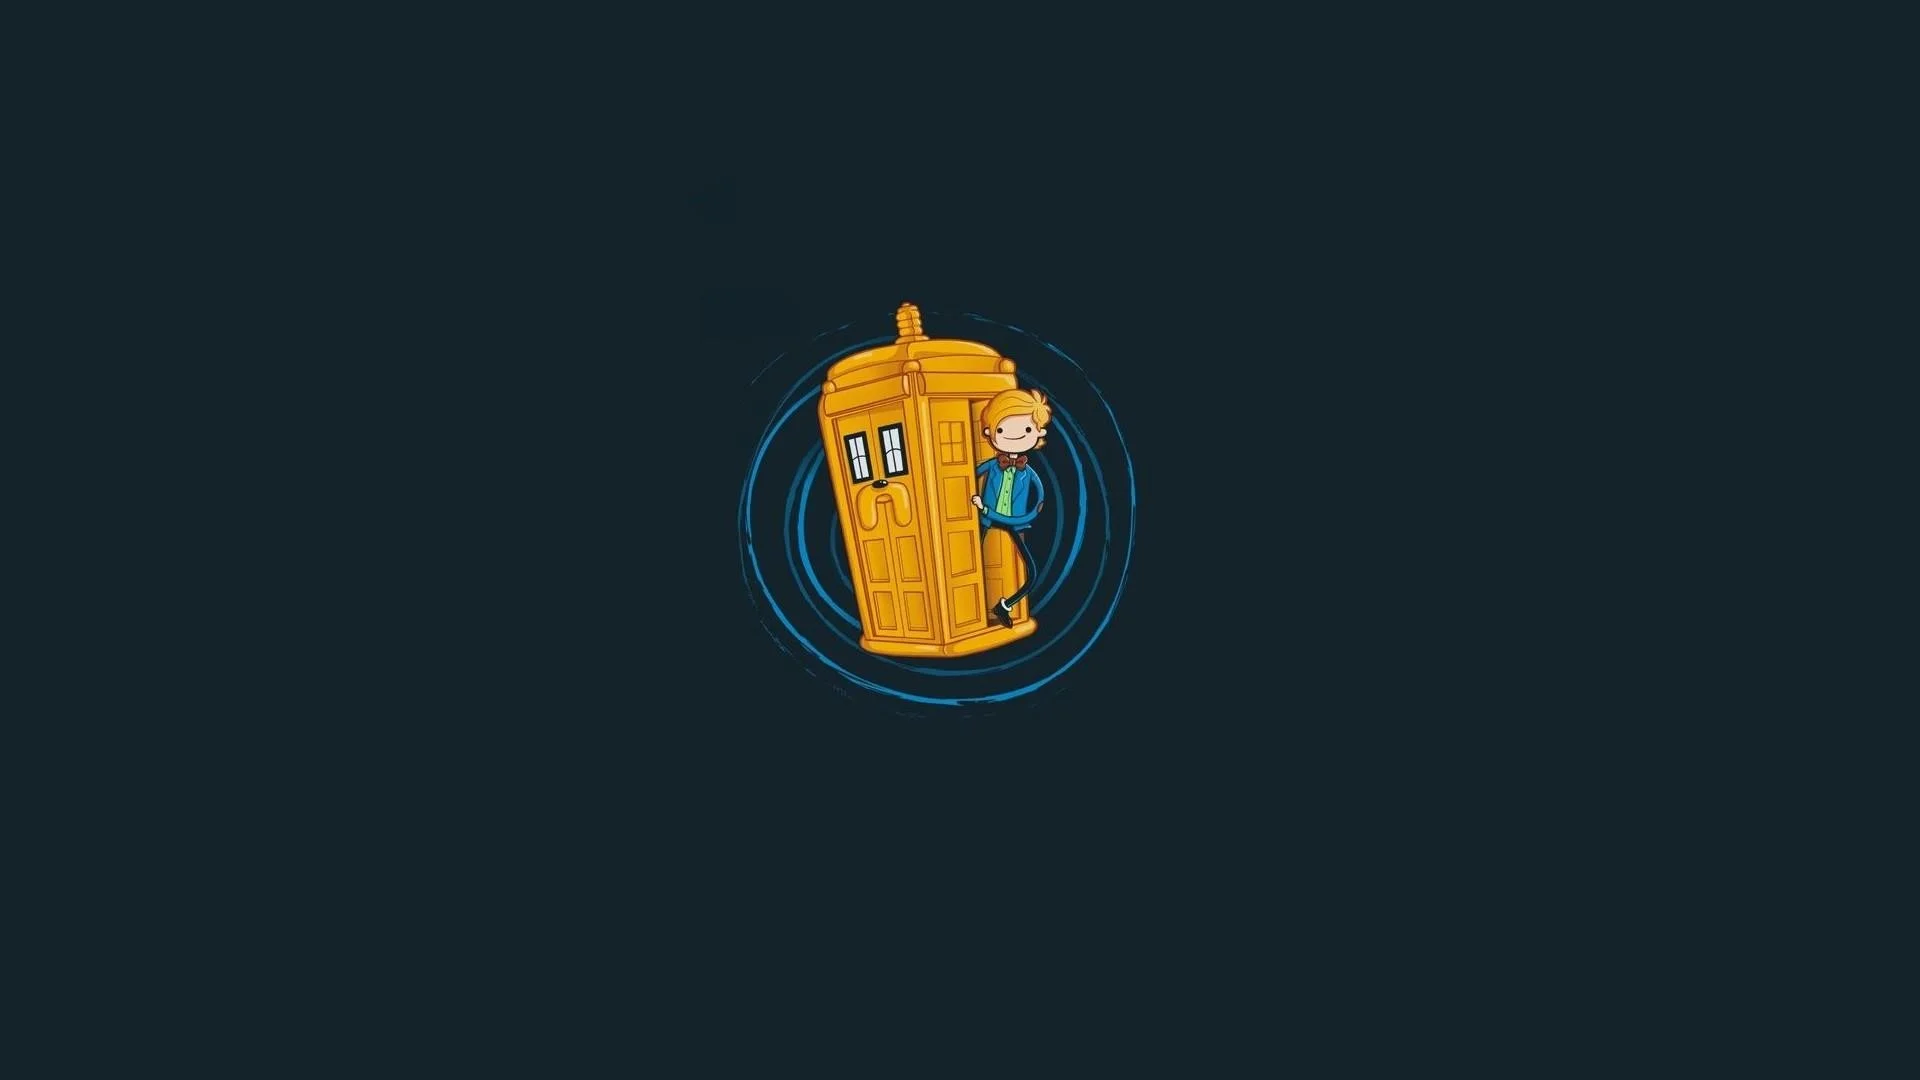 … doctor who wallpaper iphone …